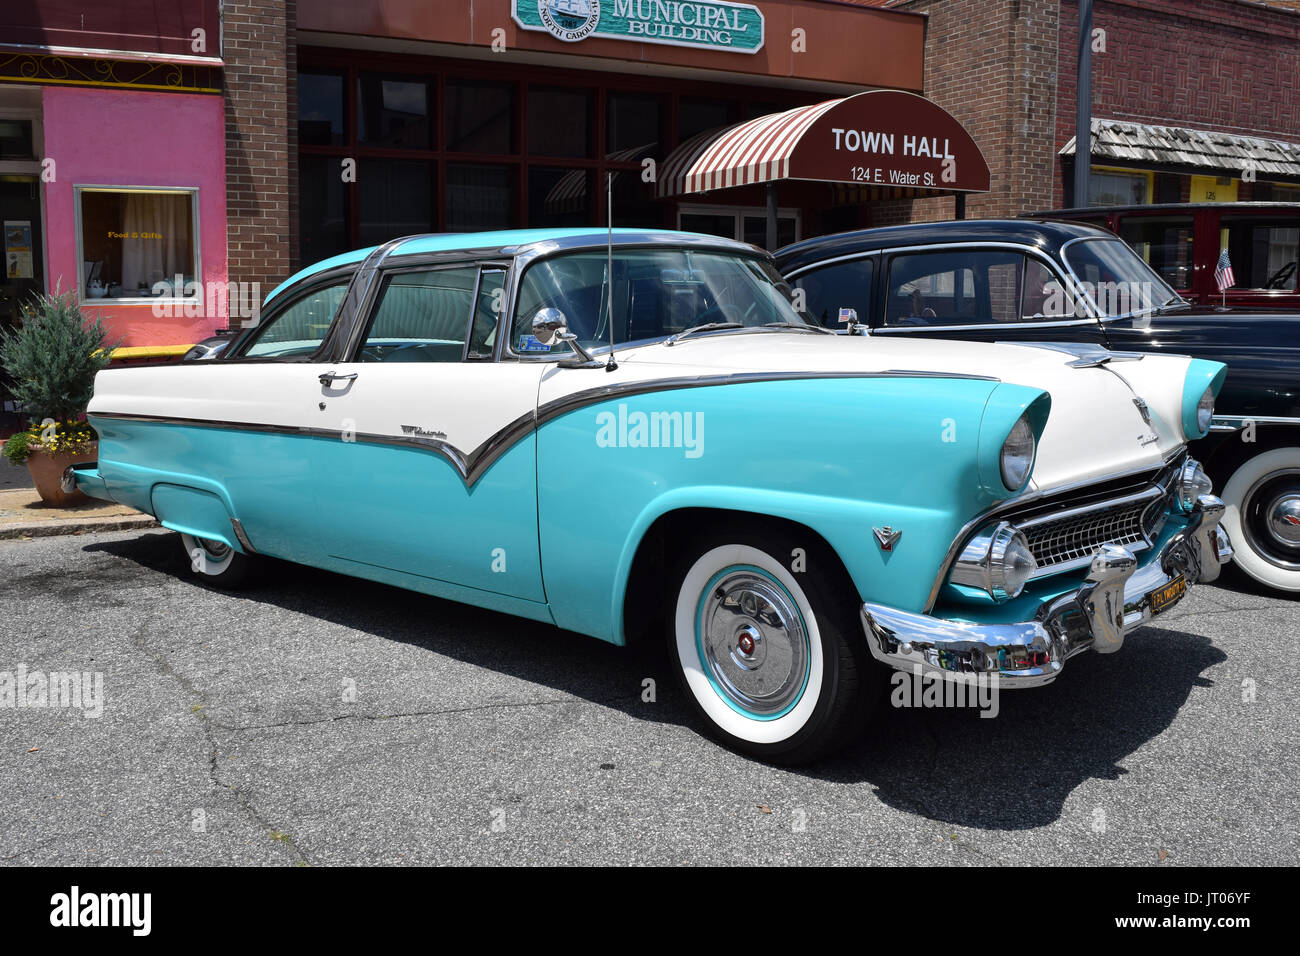 A 1955 Ford Crown Victoria. Stock Photo